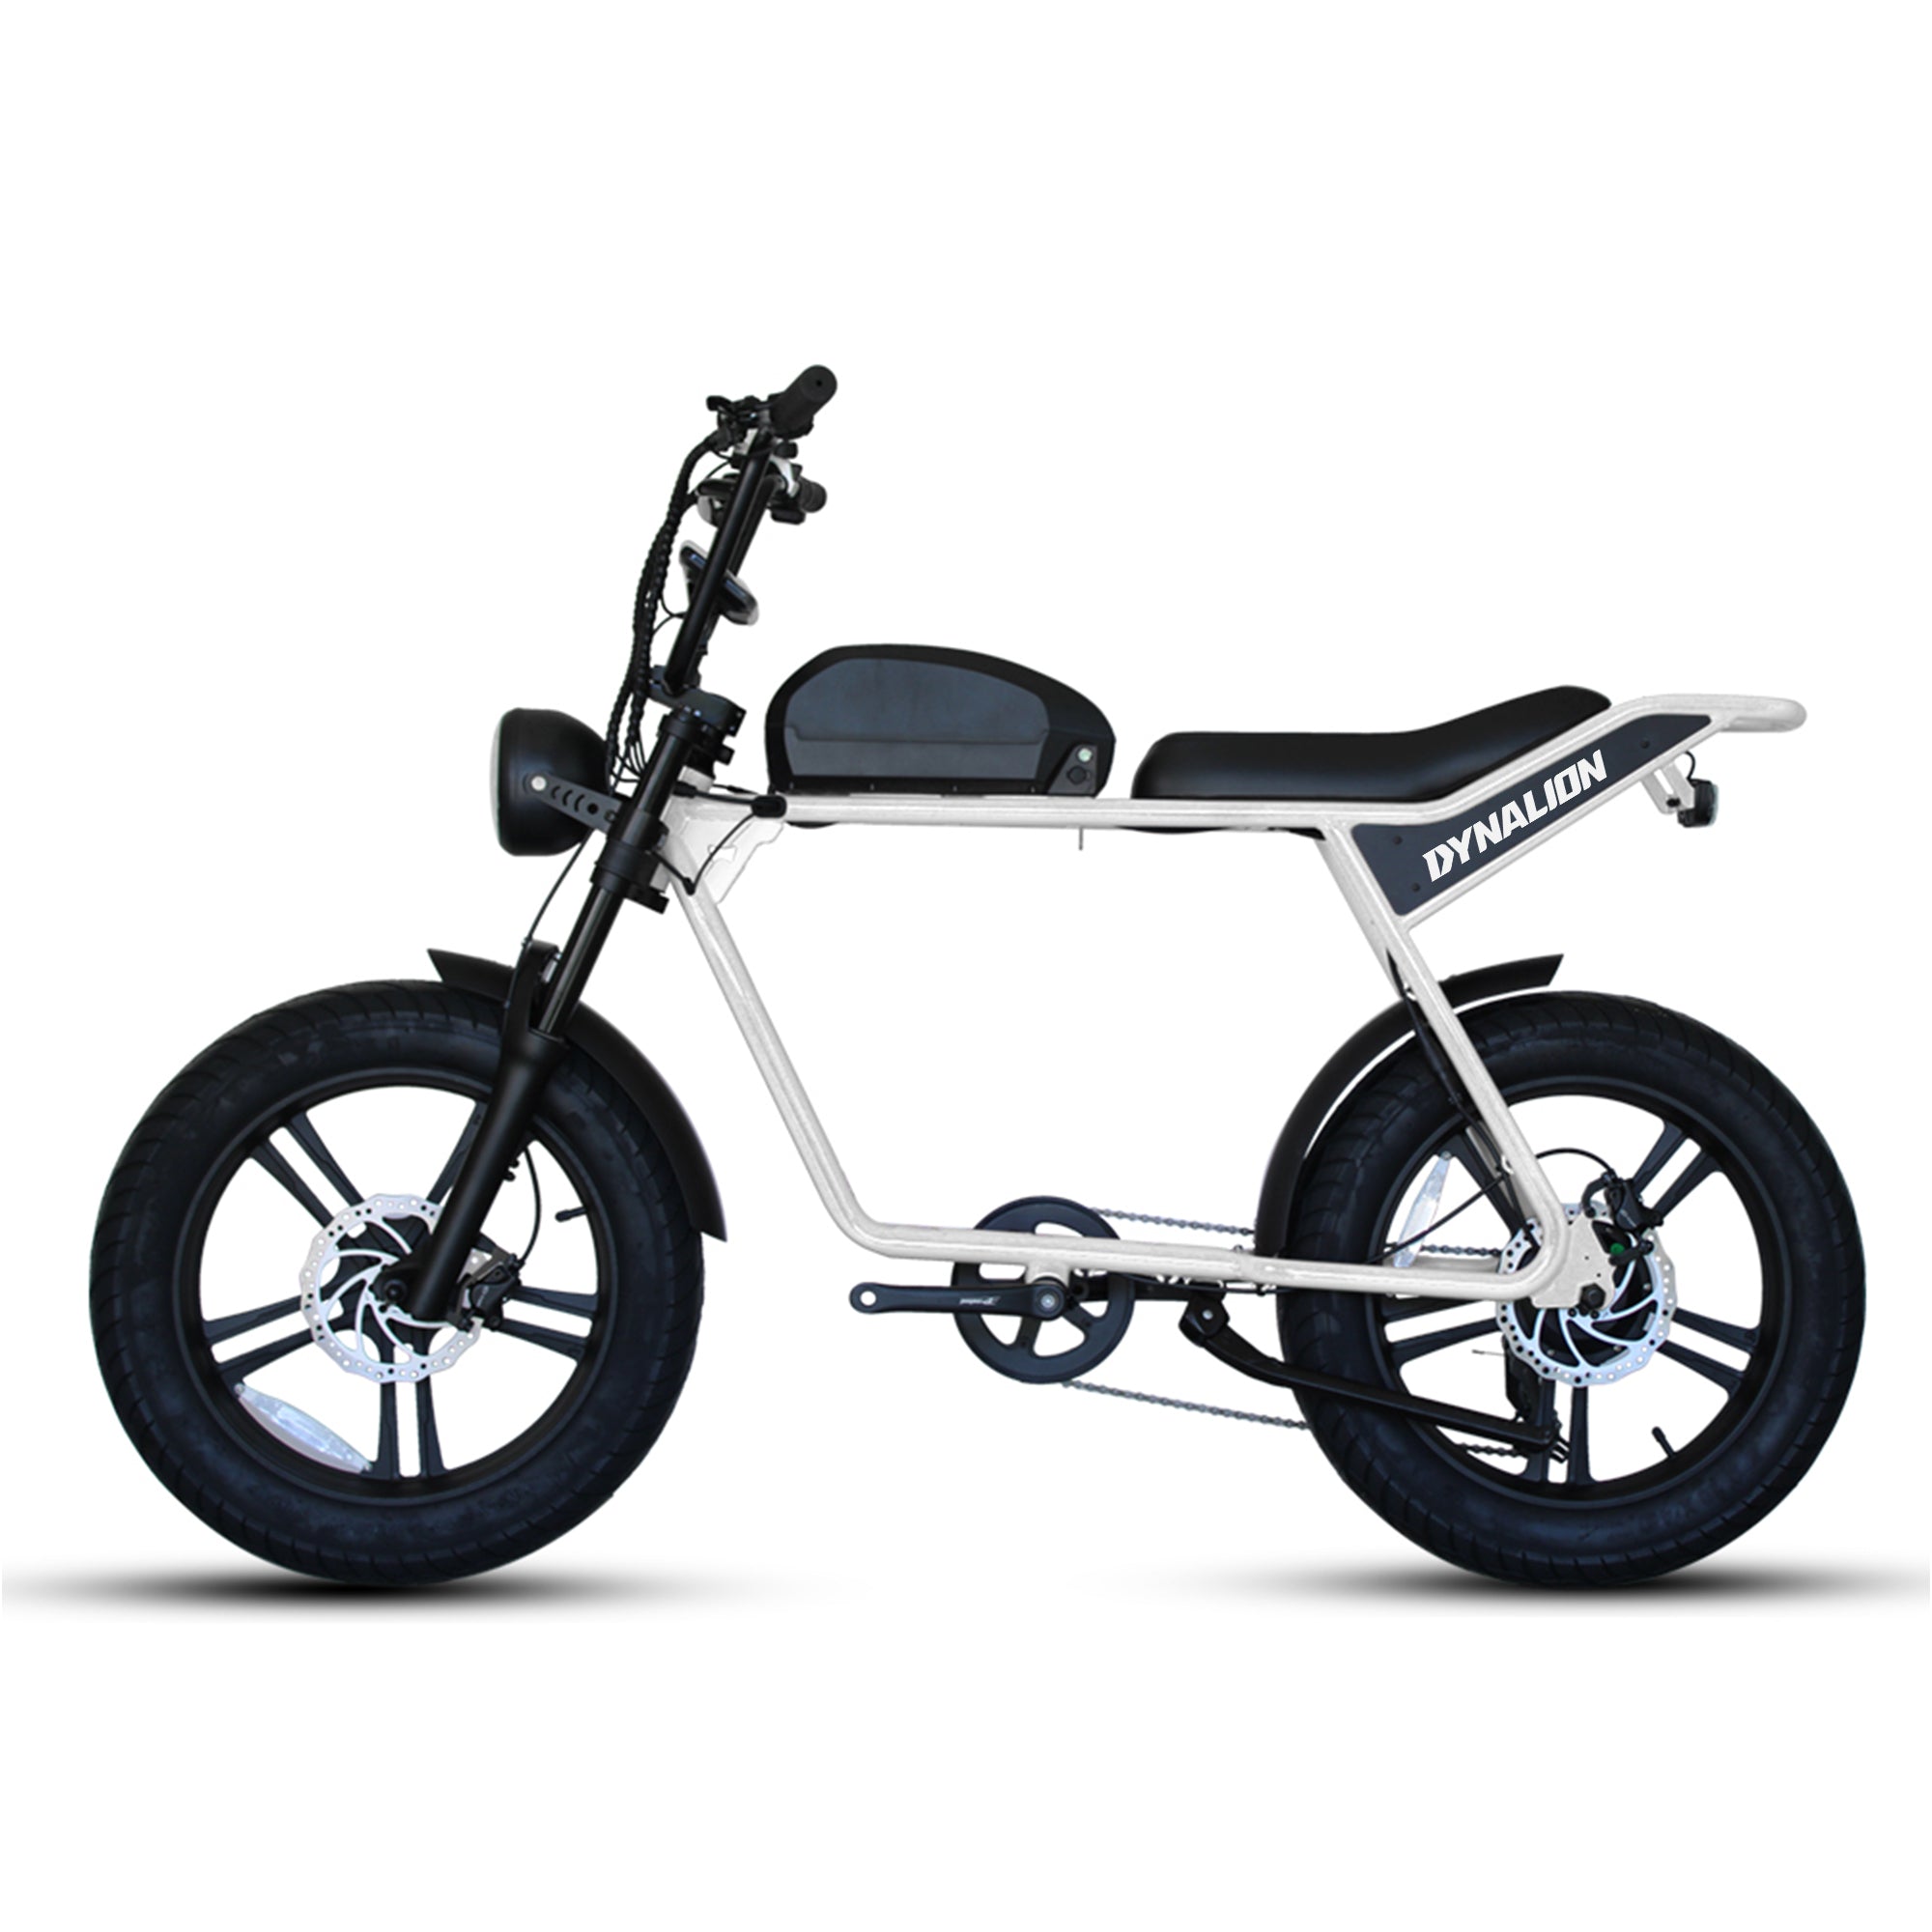 US Stock Ready To Ship Electric Motor Cycle Fast Delivery 750w Fatbike Electric Bike Europe Warehouse | Electrr Inc